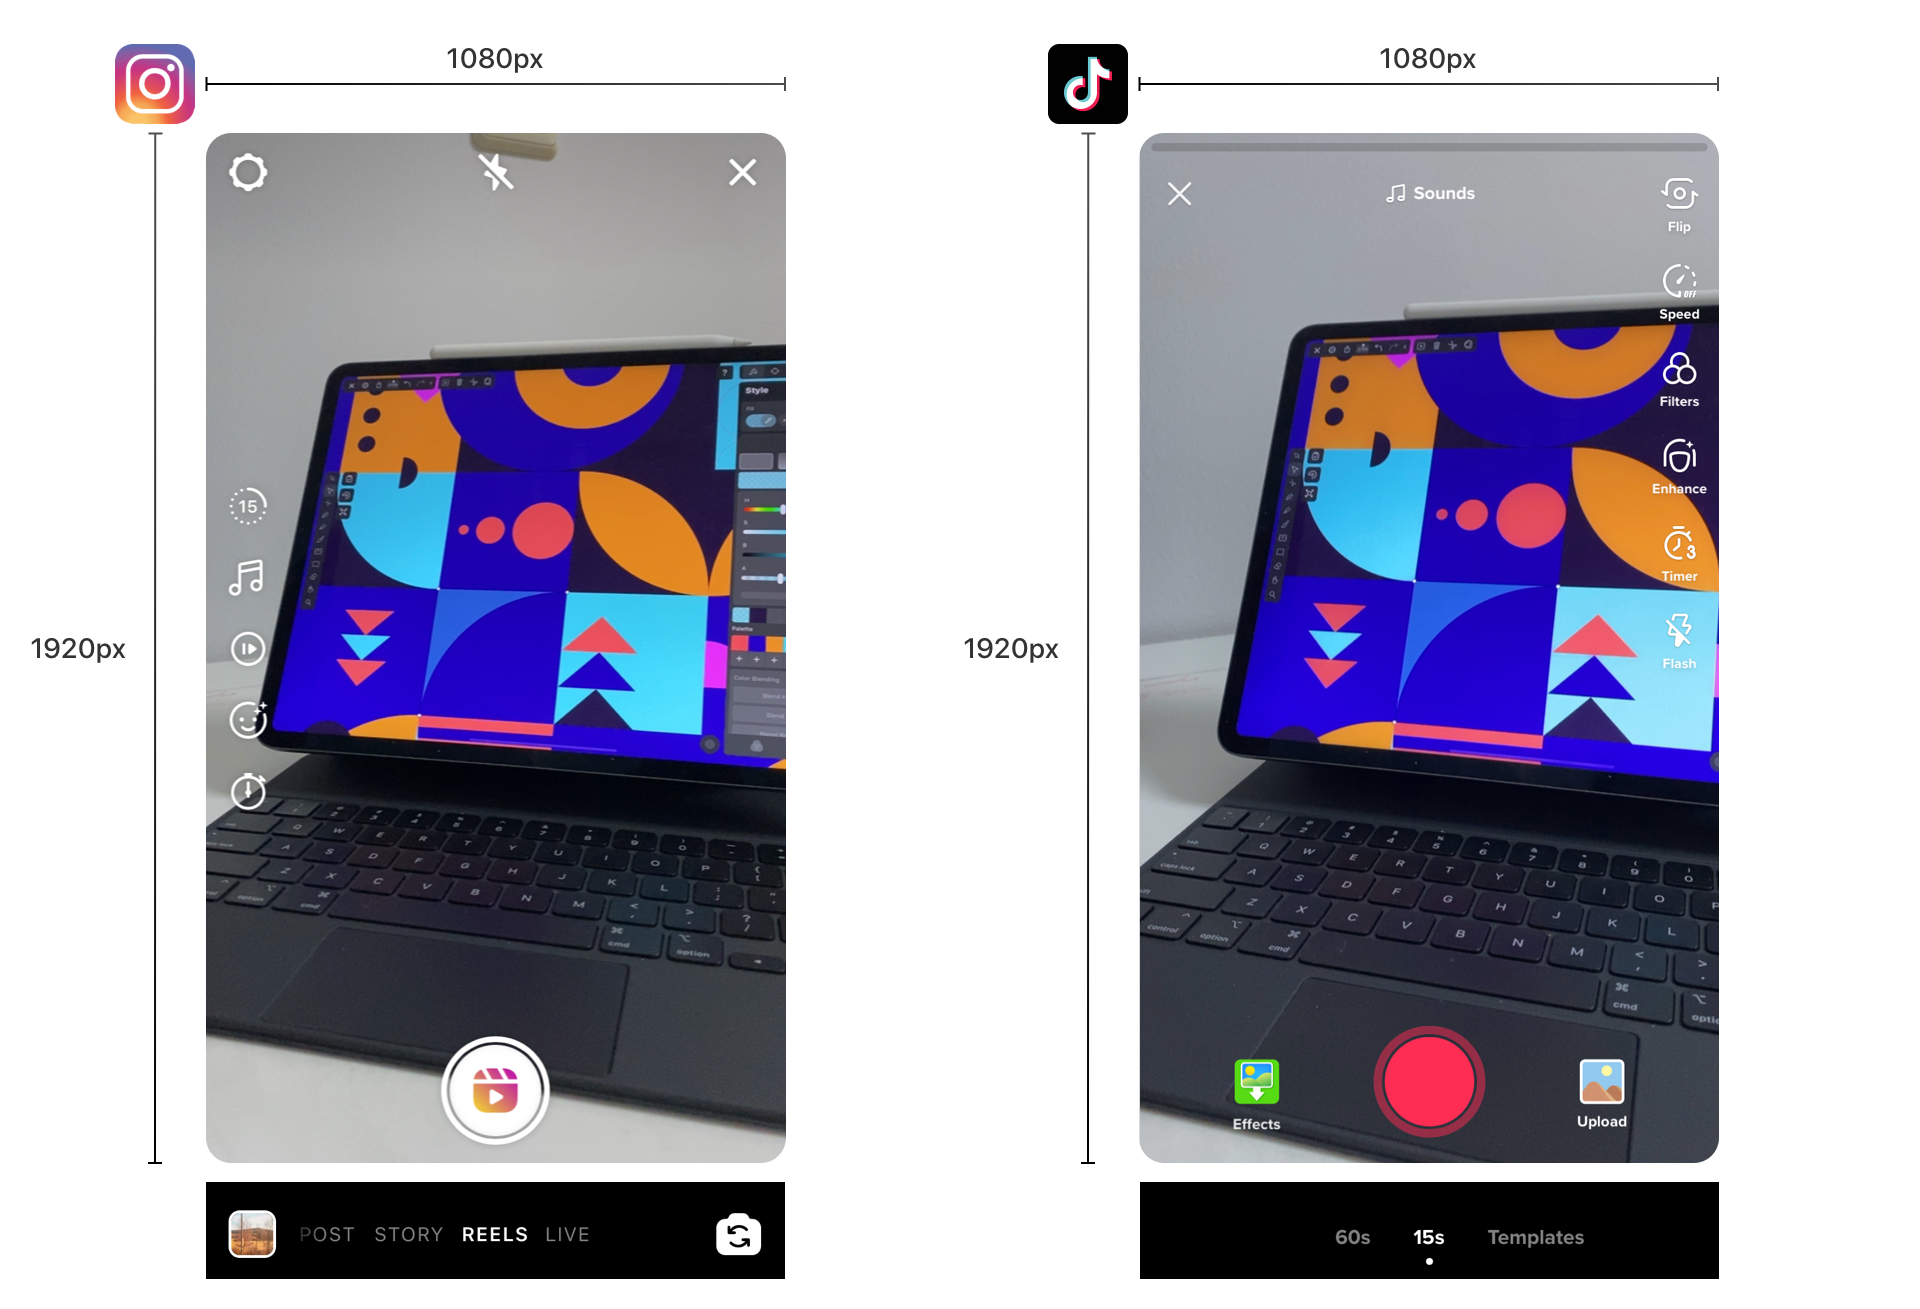 Laptop with graphic design on screen, within Instagram and TikTok upload interfaces.